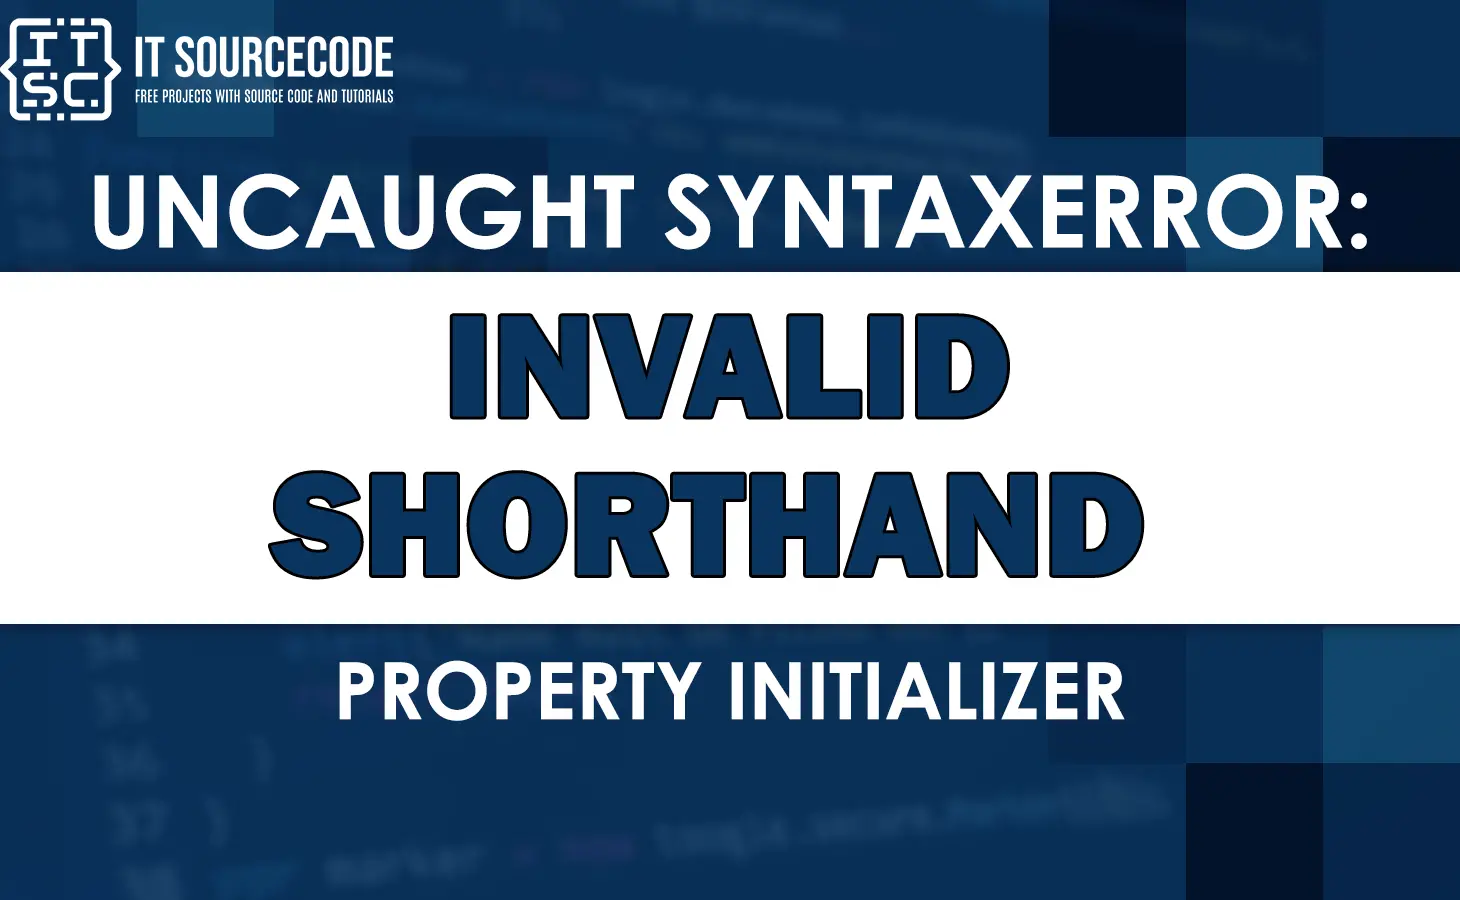 Uncaught syntaxerror: invalid shorthand property initializer